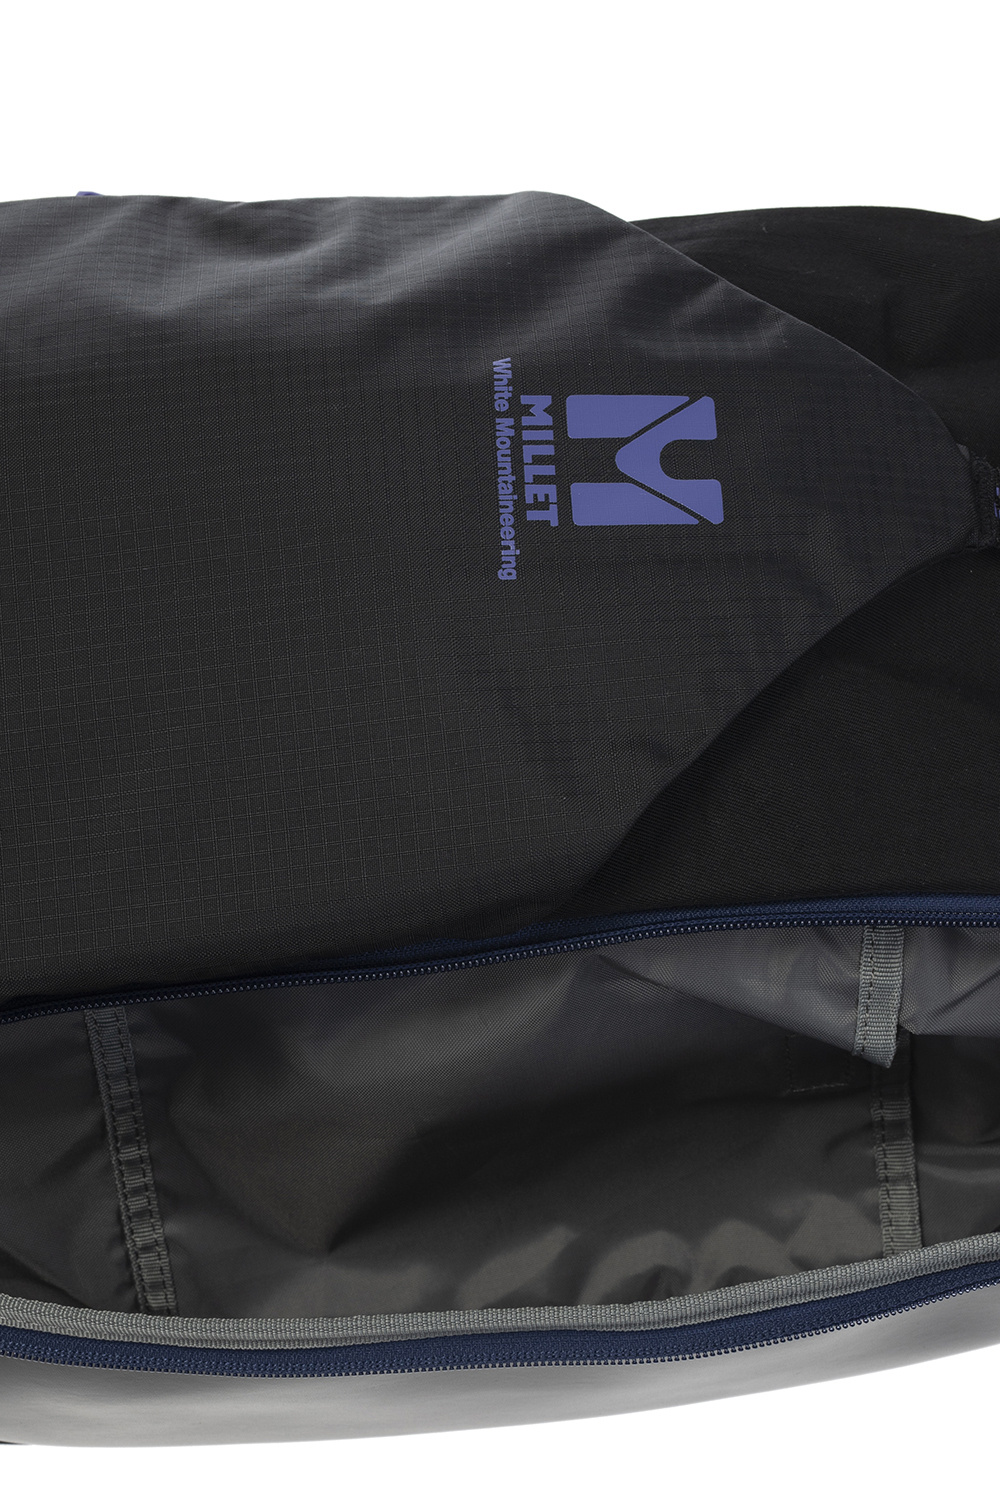 White Mountaineering Backpack with logo